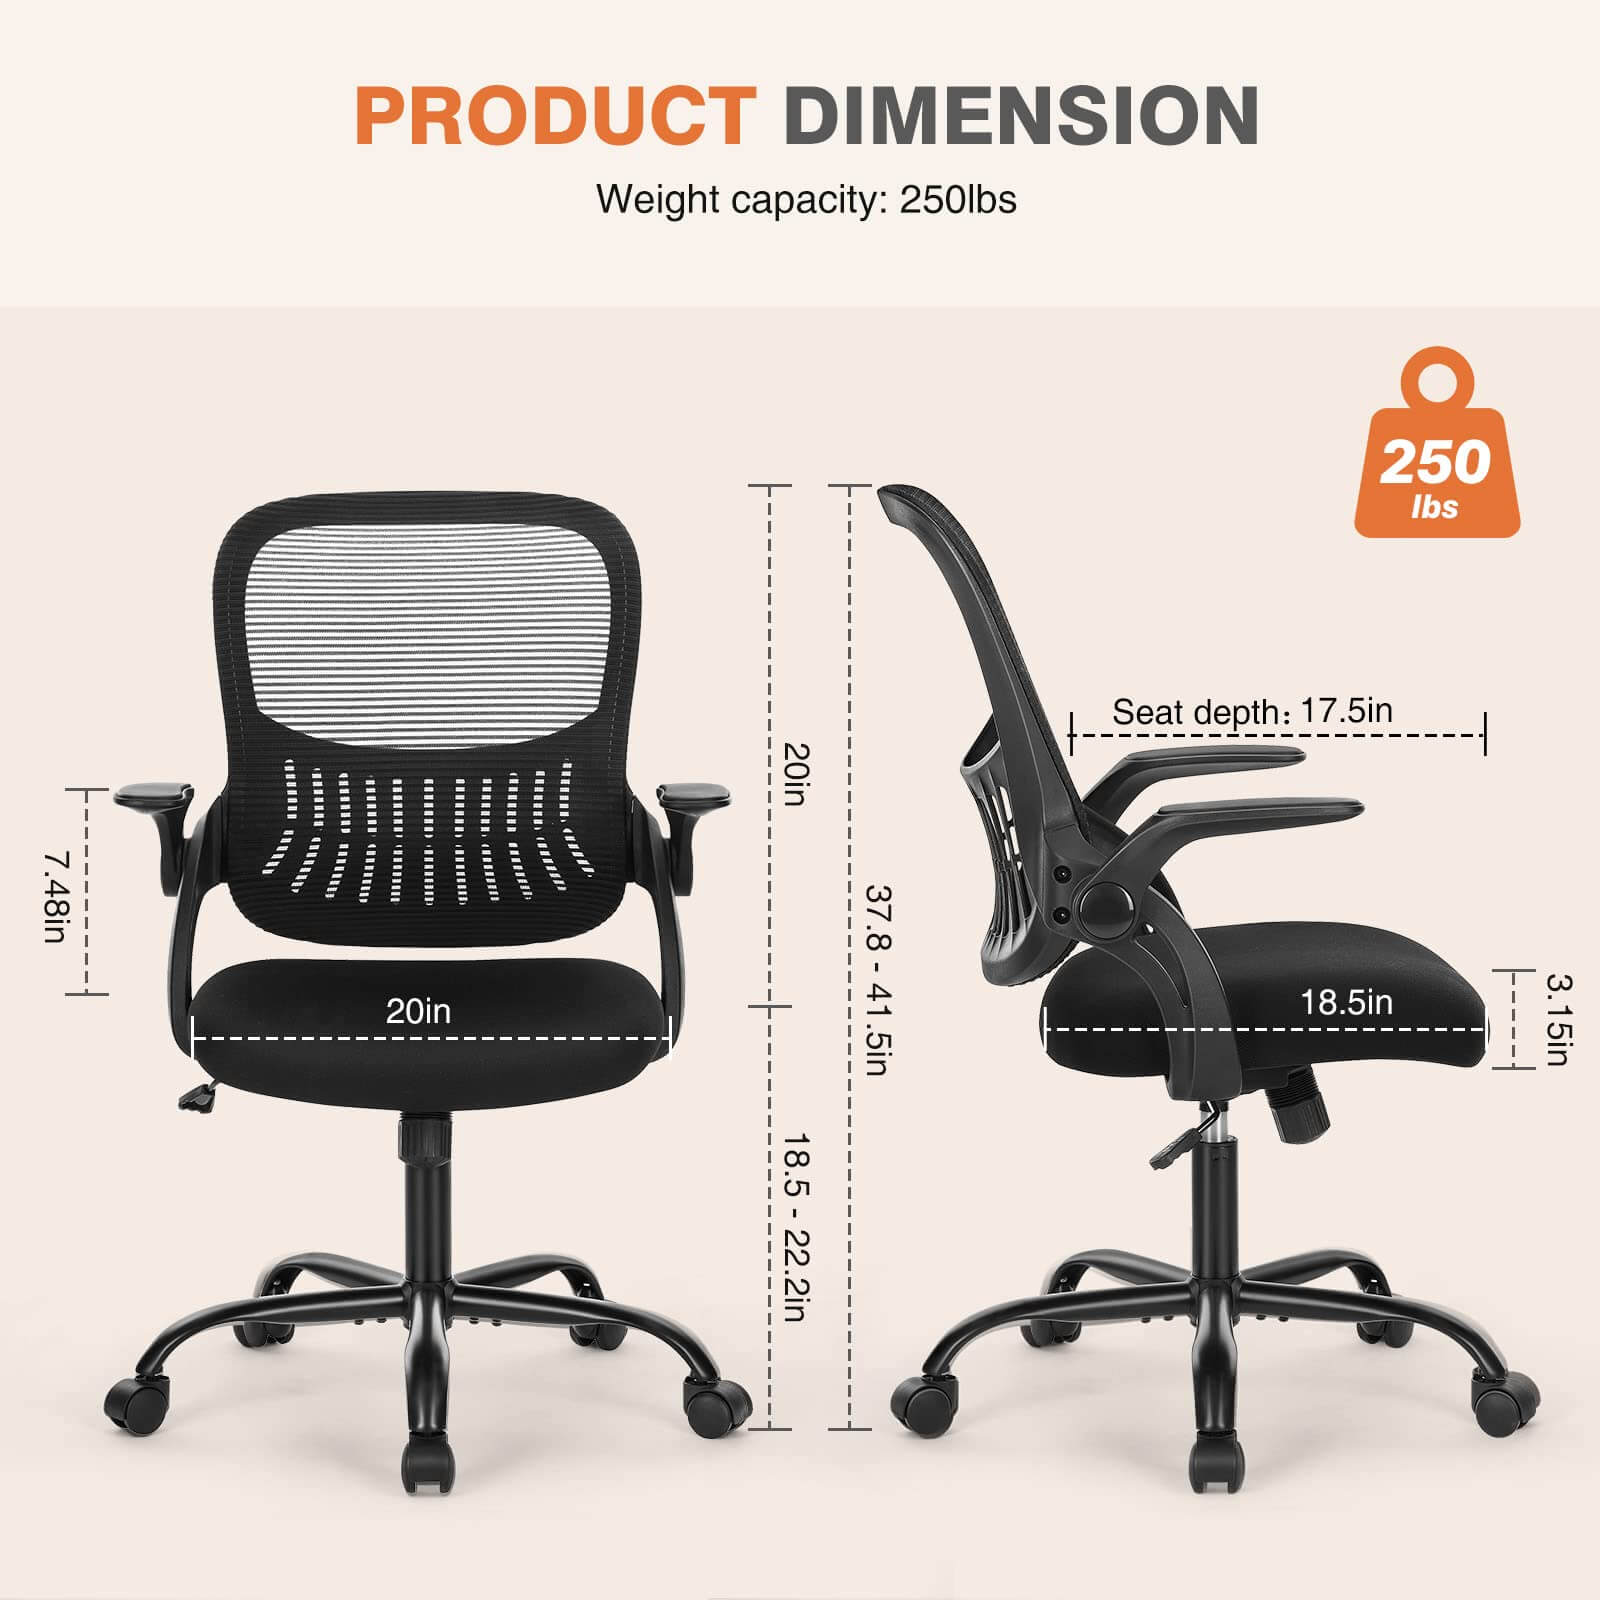 mesh-office-chairs#Color_Black#Quantity_4 Chair